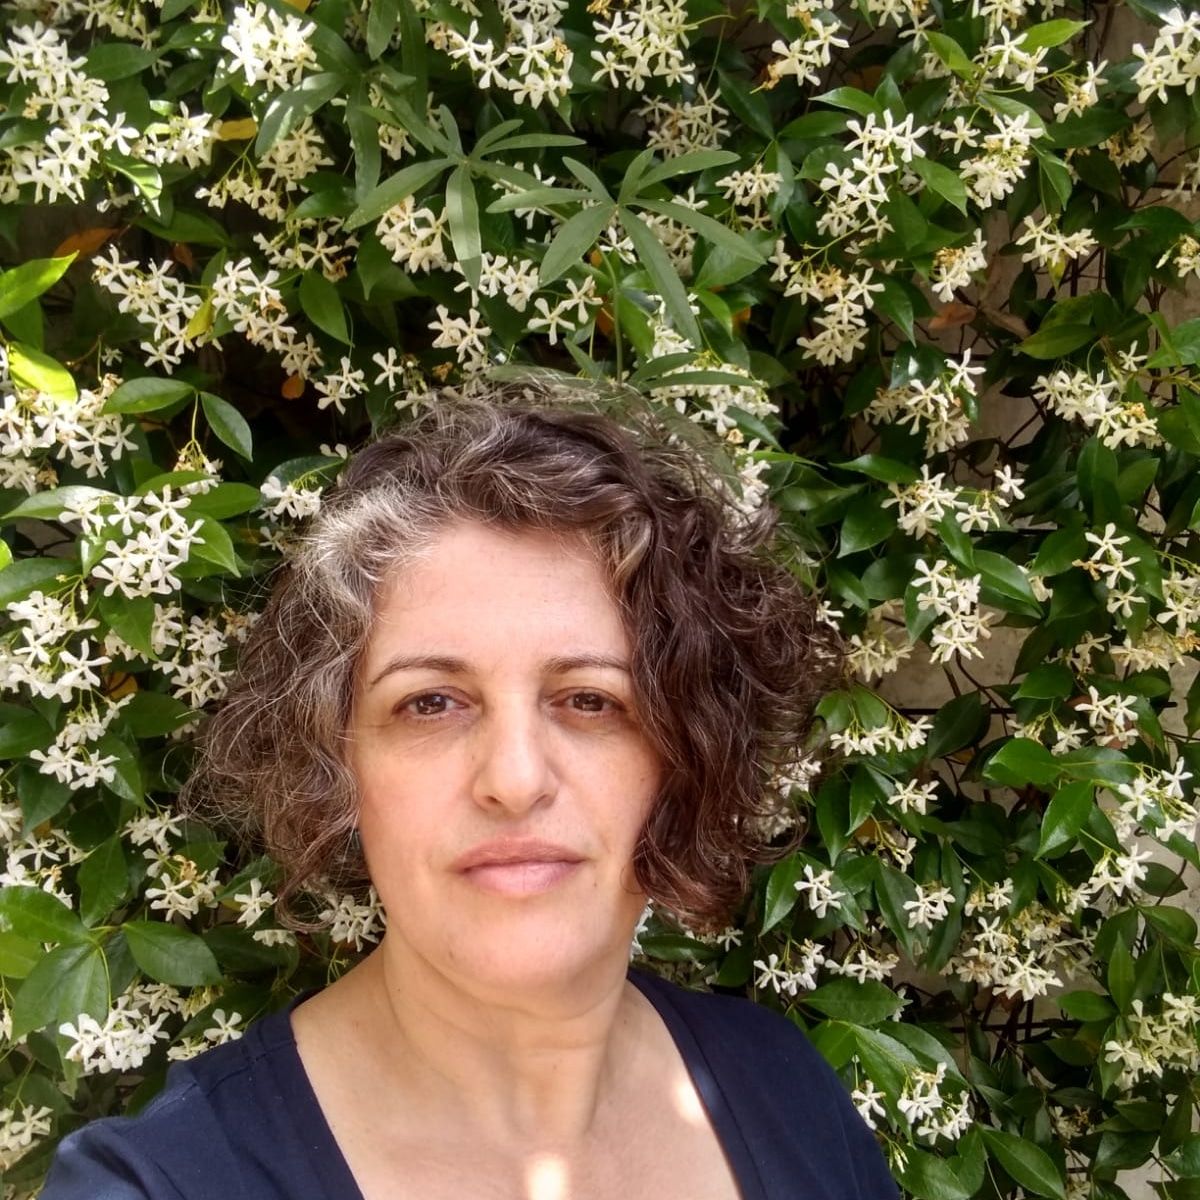 Photograph of Anabela Plos standing in front of flowers